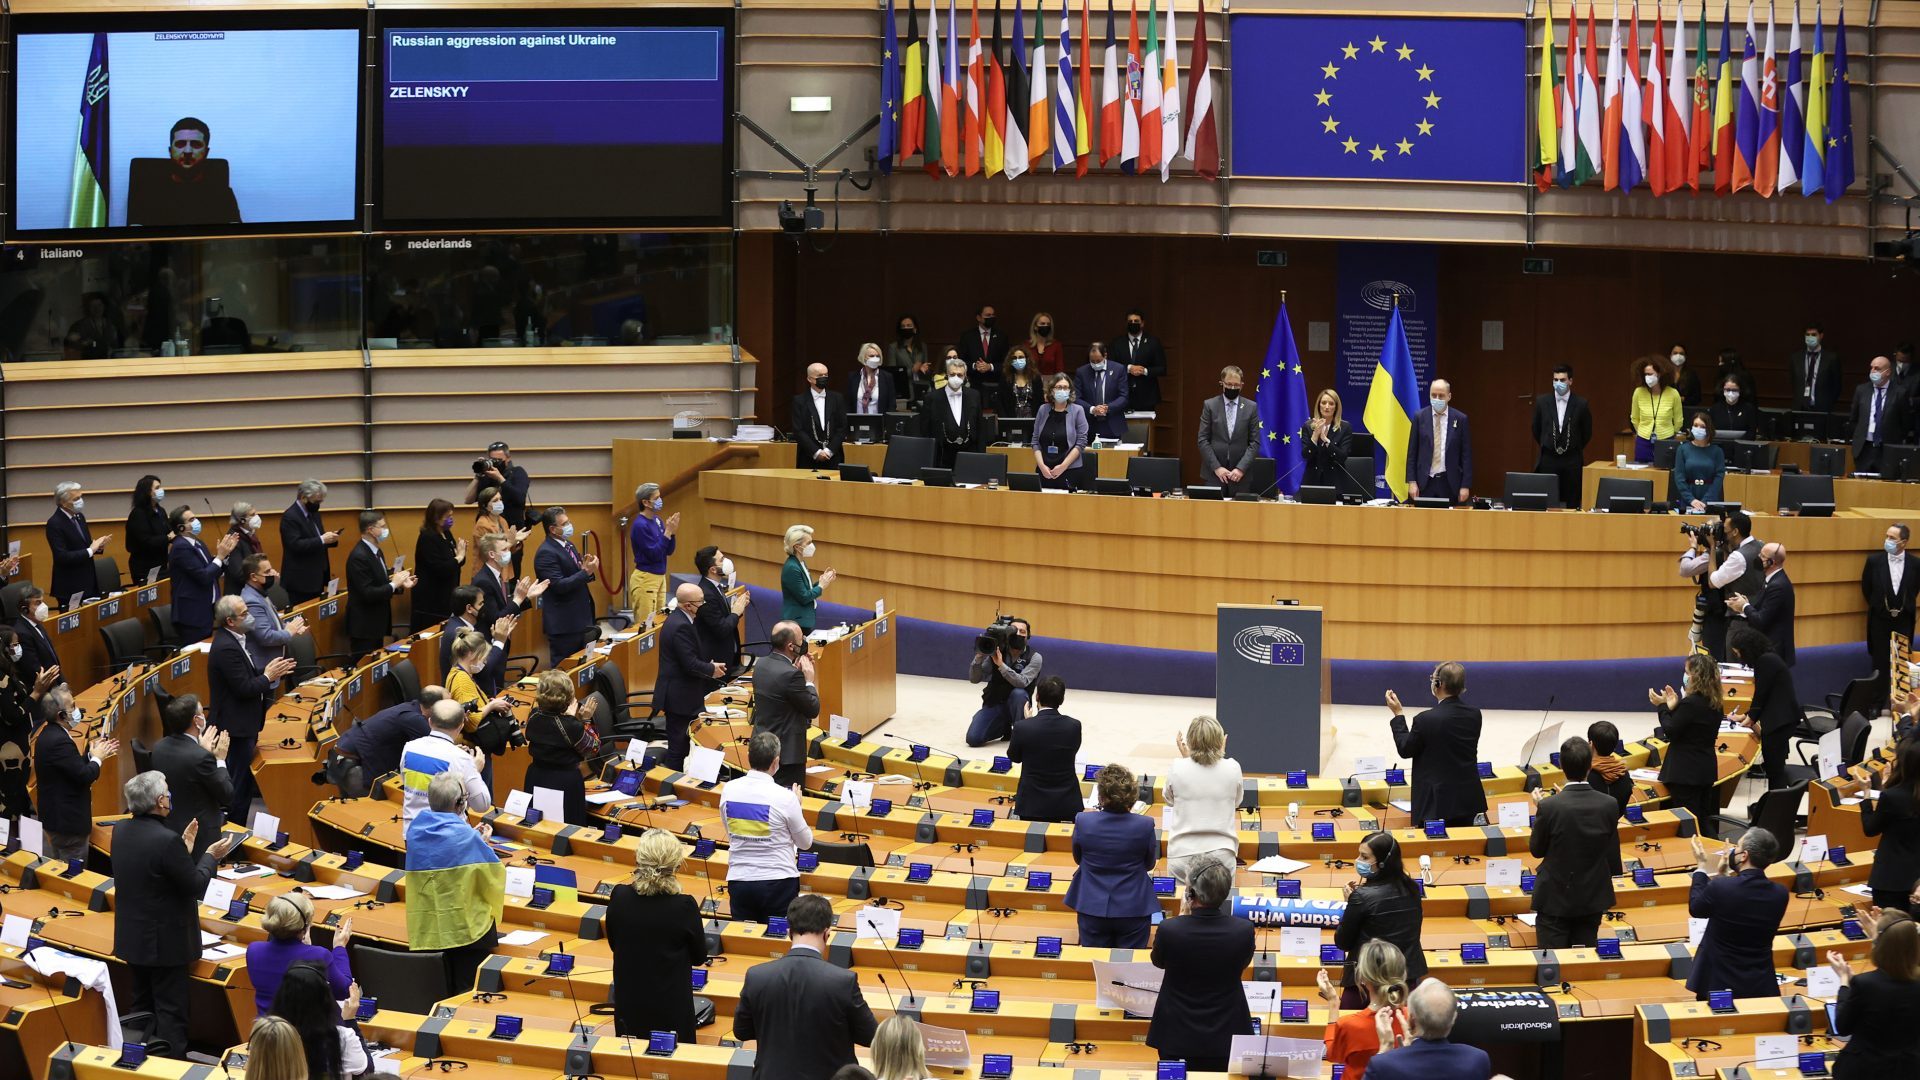 Ukrainian President Volodymyr Zelensky (on screen) gives a live video address during a special plenary session of the European Parliament. Photo: Dursun Aydemir/Anadolu Agency via Getty Images